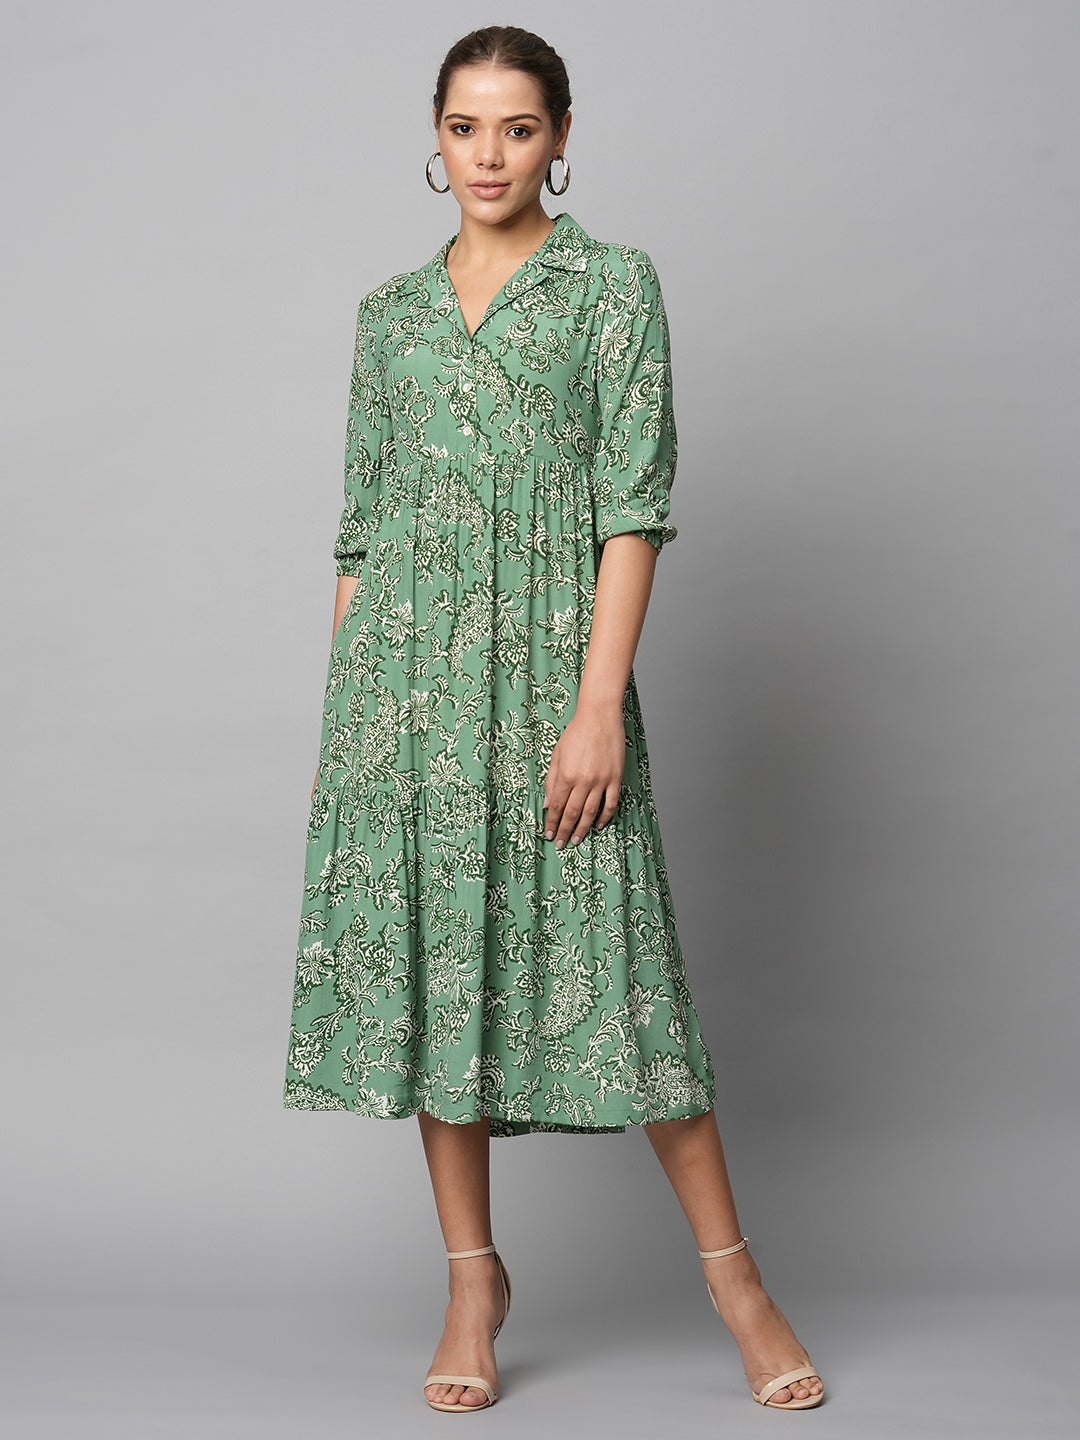 Noteched Collar Printed Viscose Tiered Dress